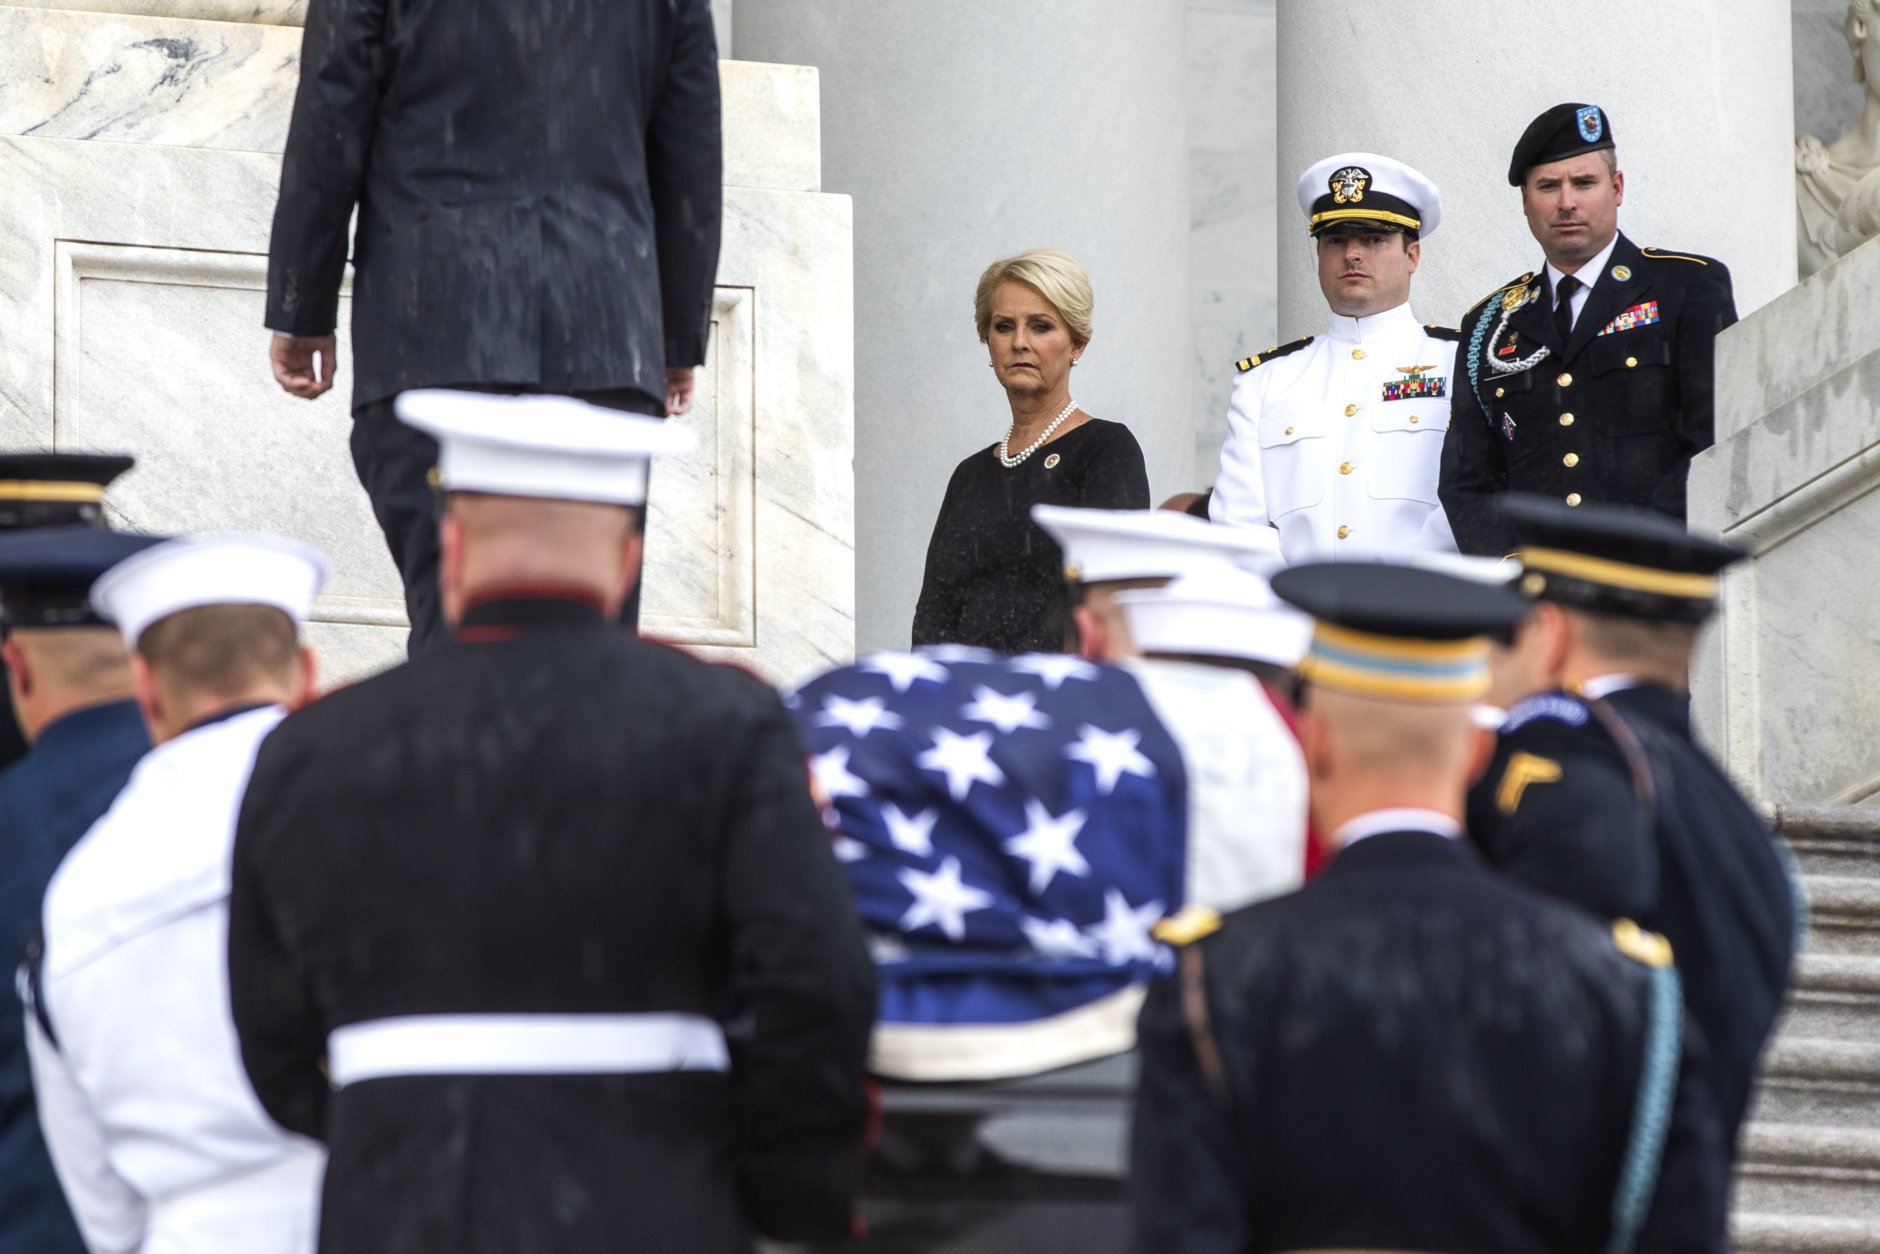 The flag-draped casket of Sen. John McCain, R-Ariz., is carried up the steps of the U.S. Capitol, Friday, Aug. 31, 2018, in Washington as Cindy McCain, top right, joined by her sons Jack McCain, and James McCain, look on. (Jim Lo Scalzo/Pool Photo via AP)